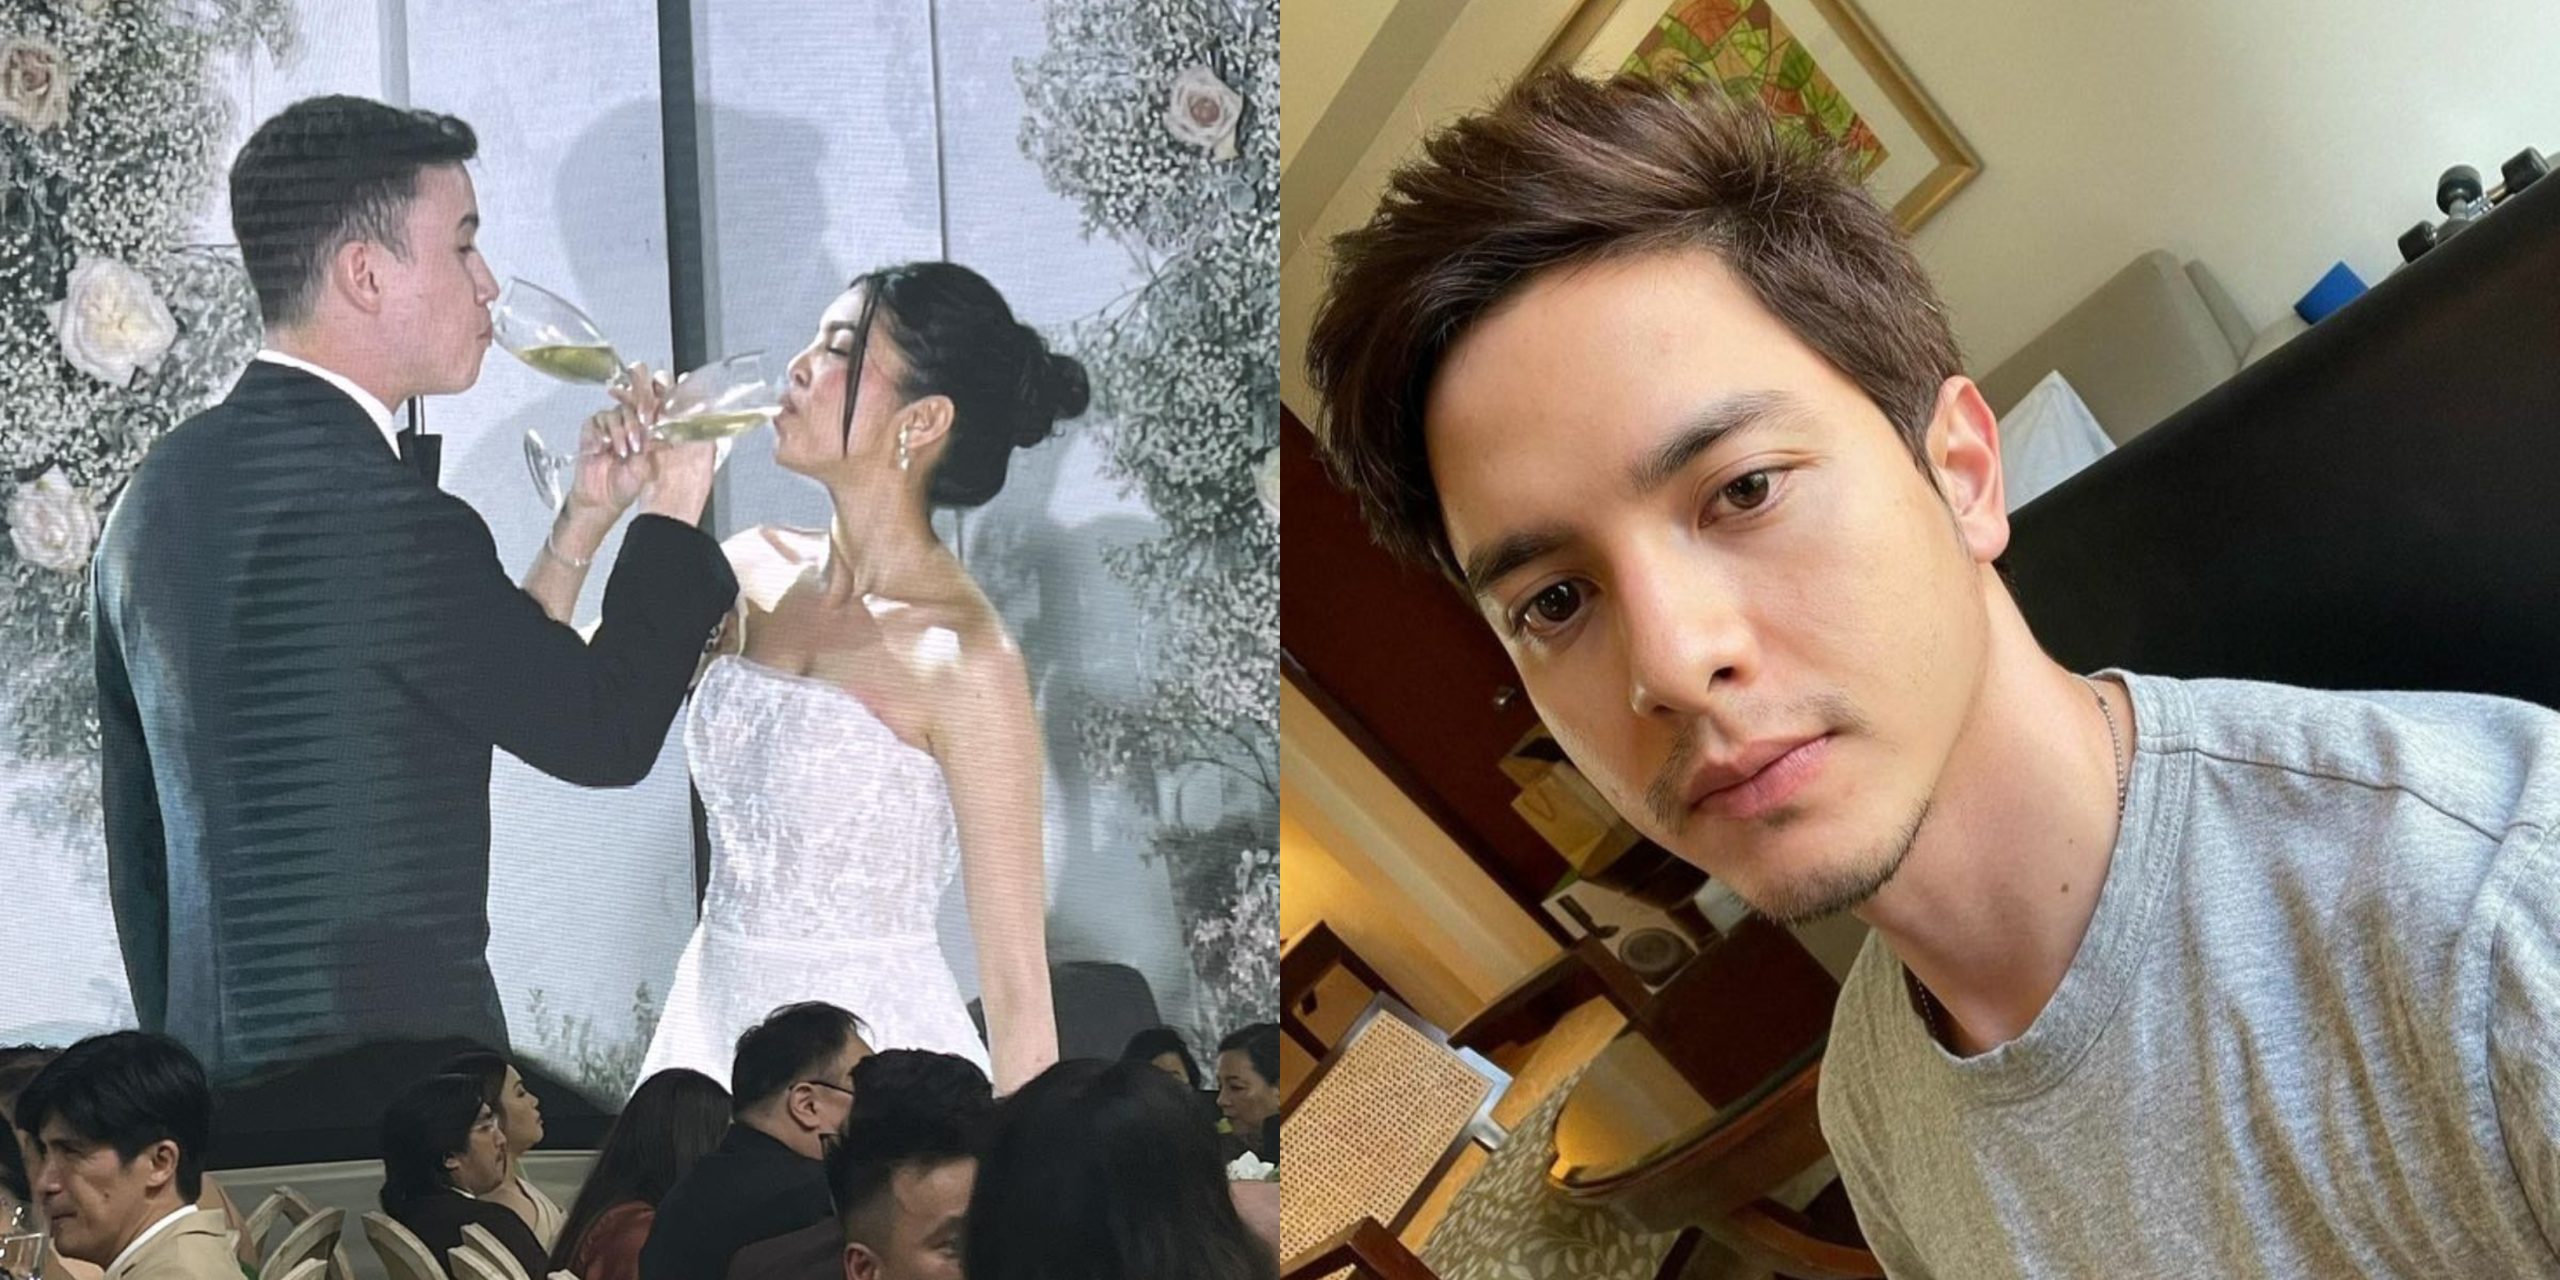 Fans question why Alden Richards is not present at Maine Mendoza's wedding